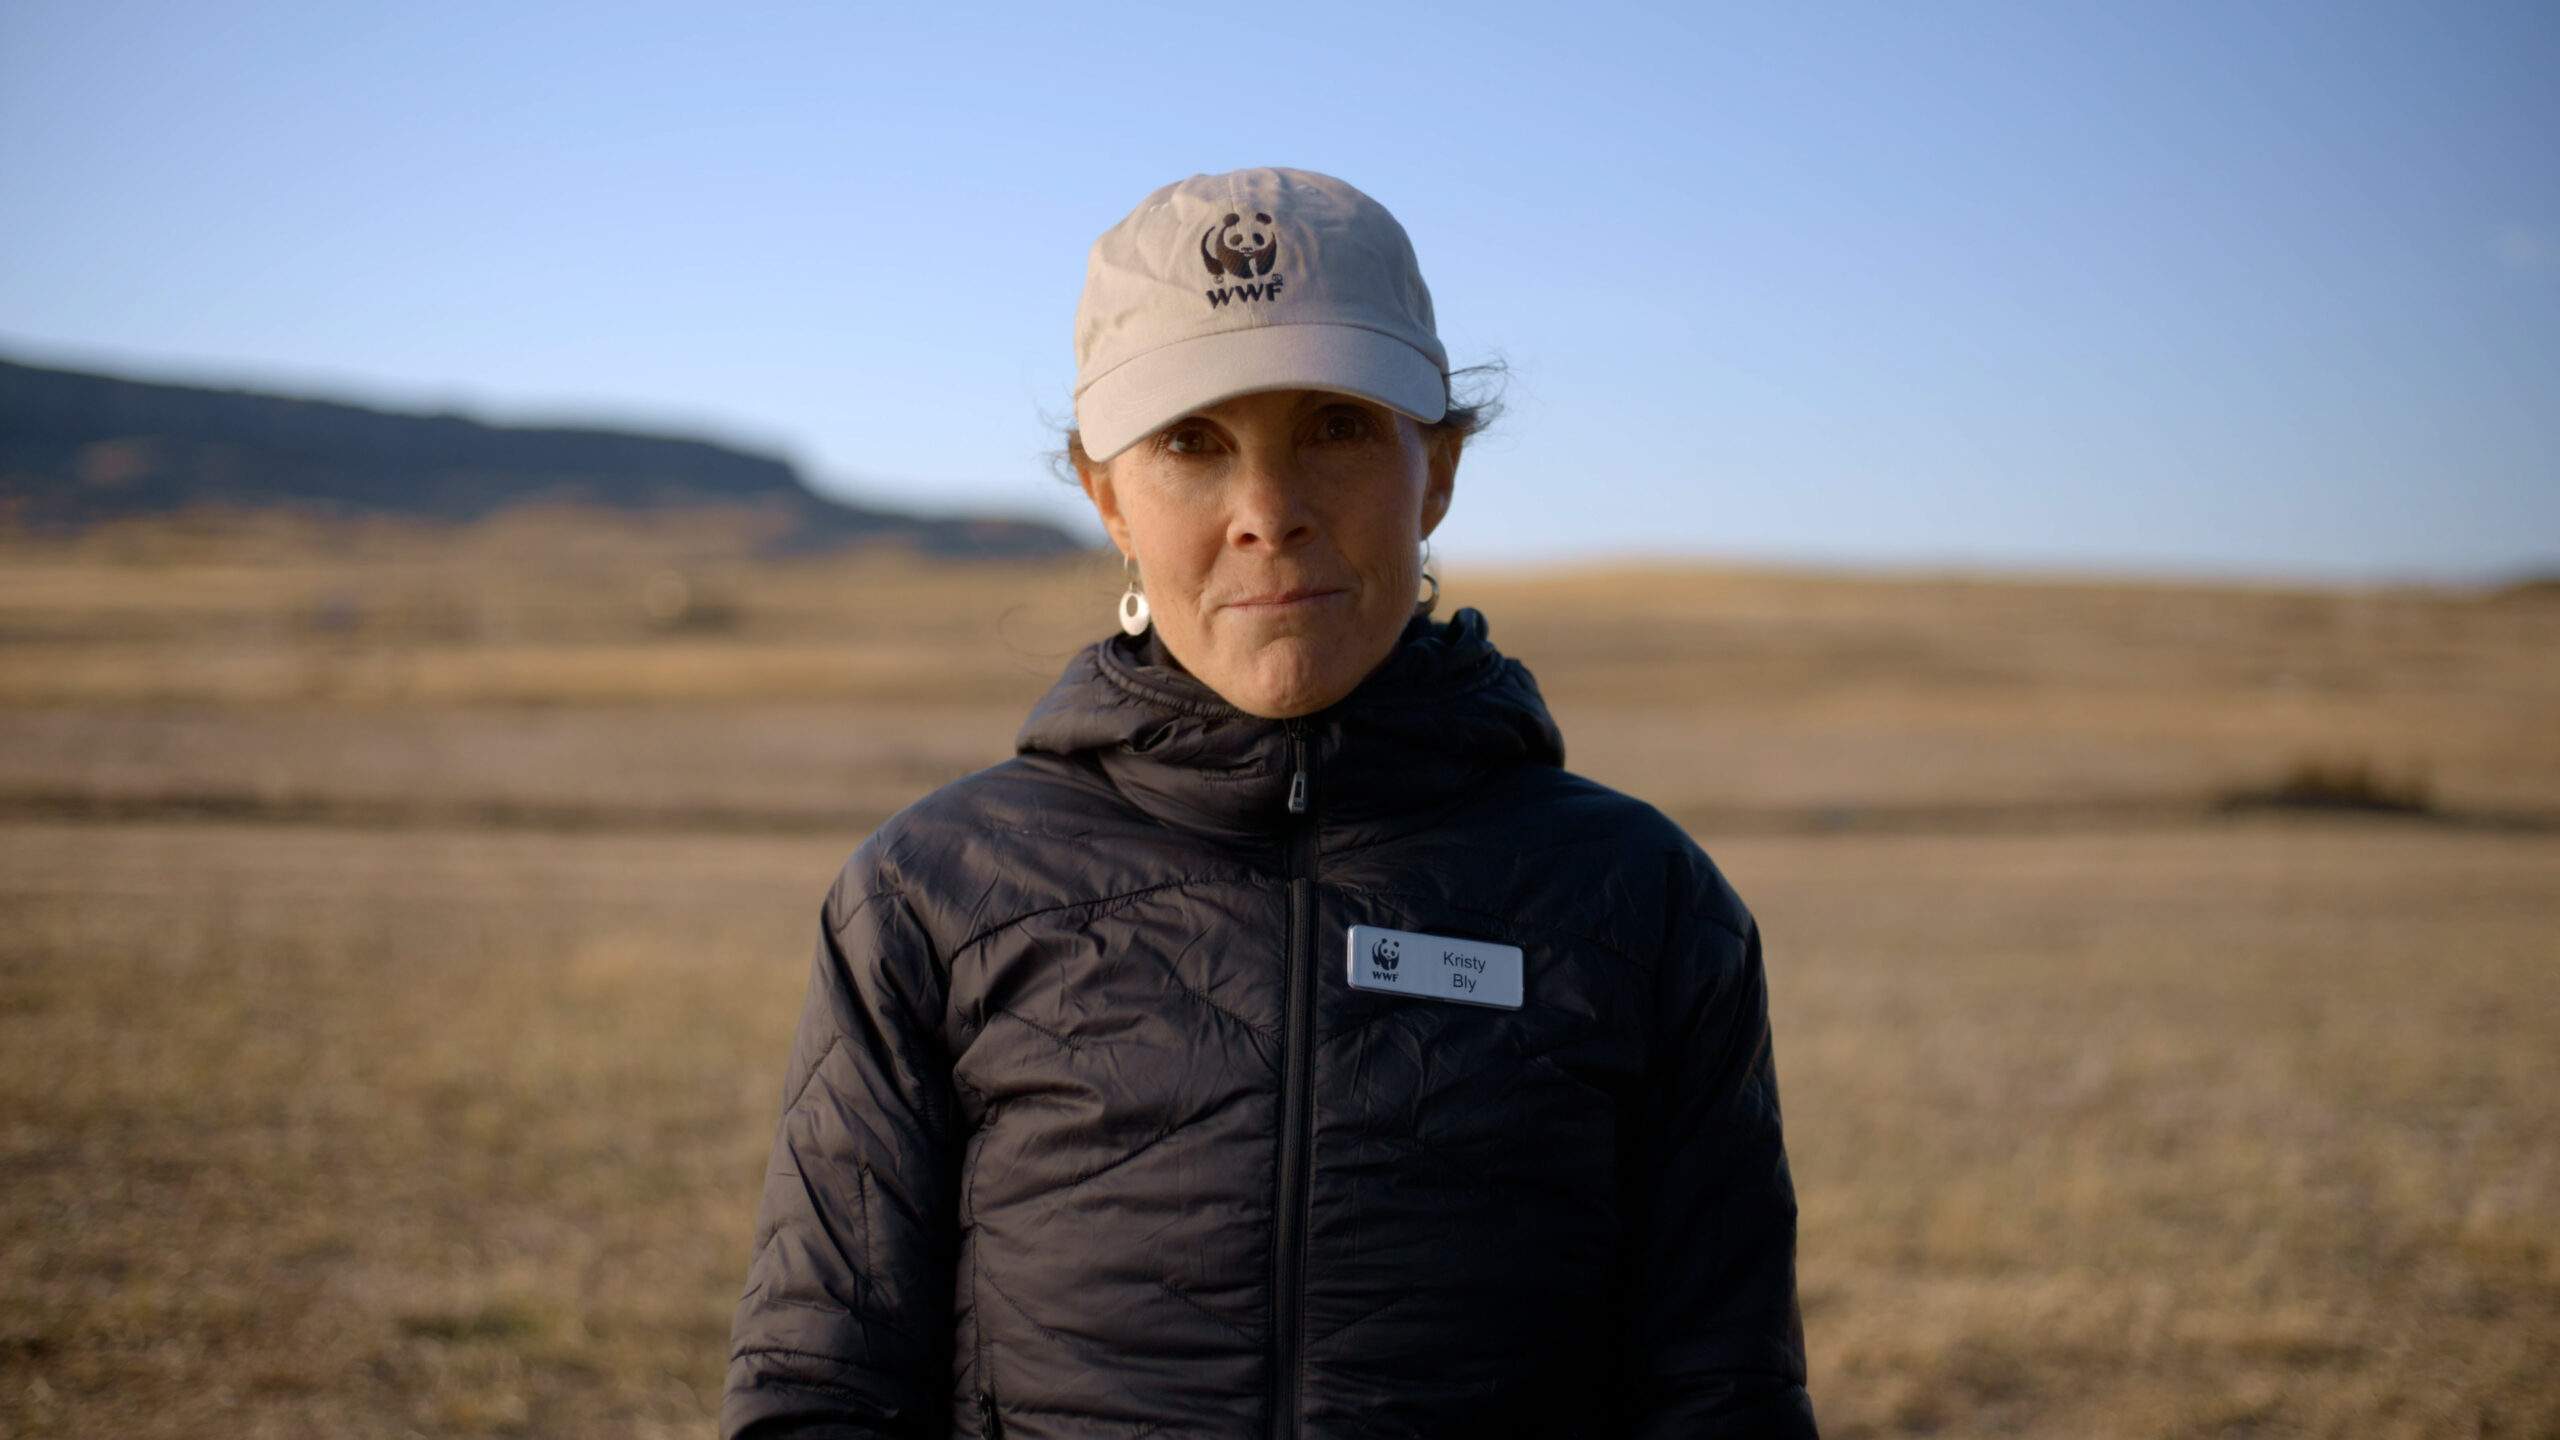 A woman wearing a beige baseball cap and a black jacket stands in a grassy field.